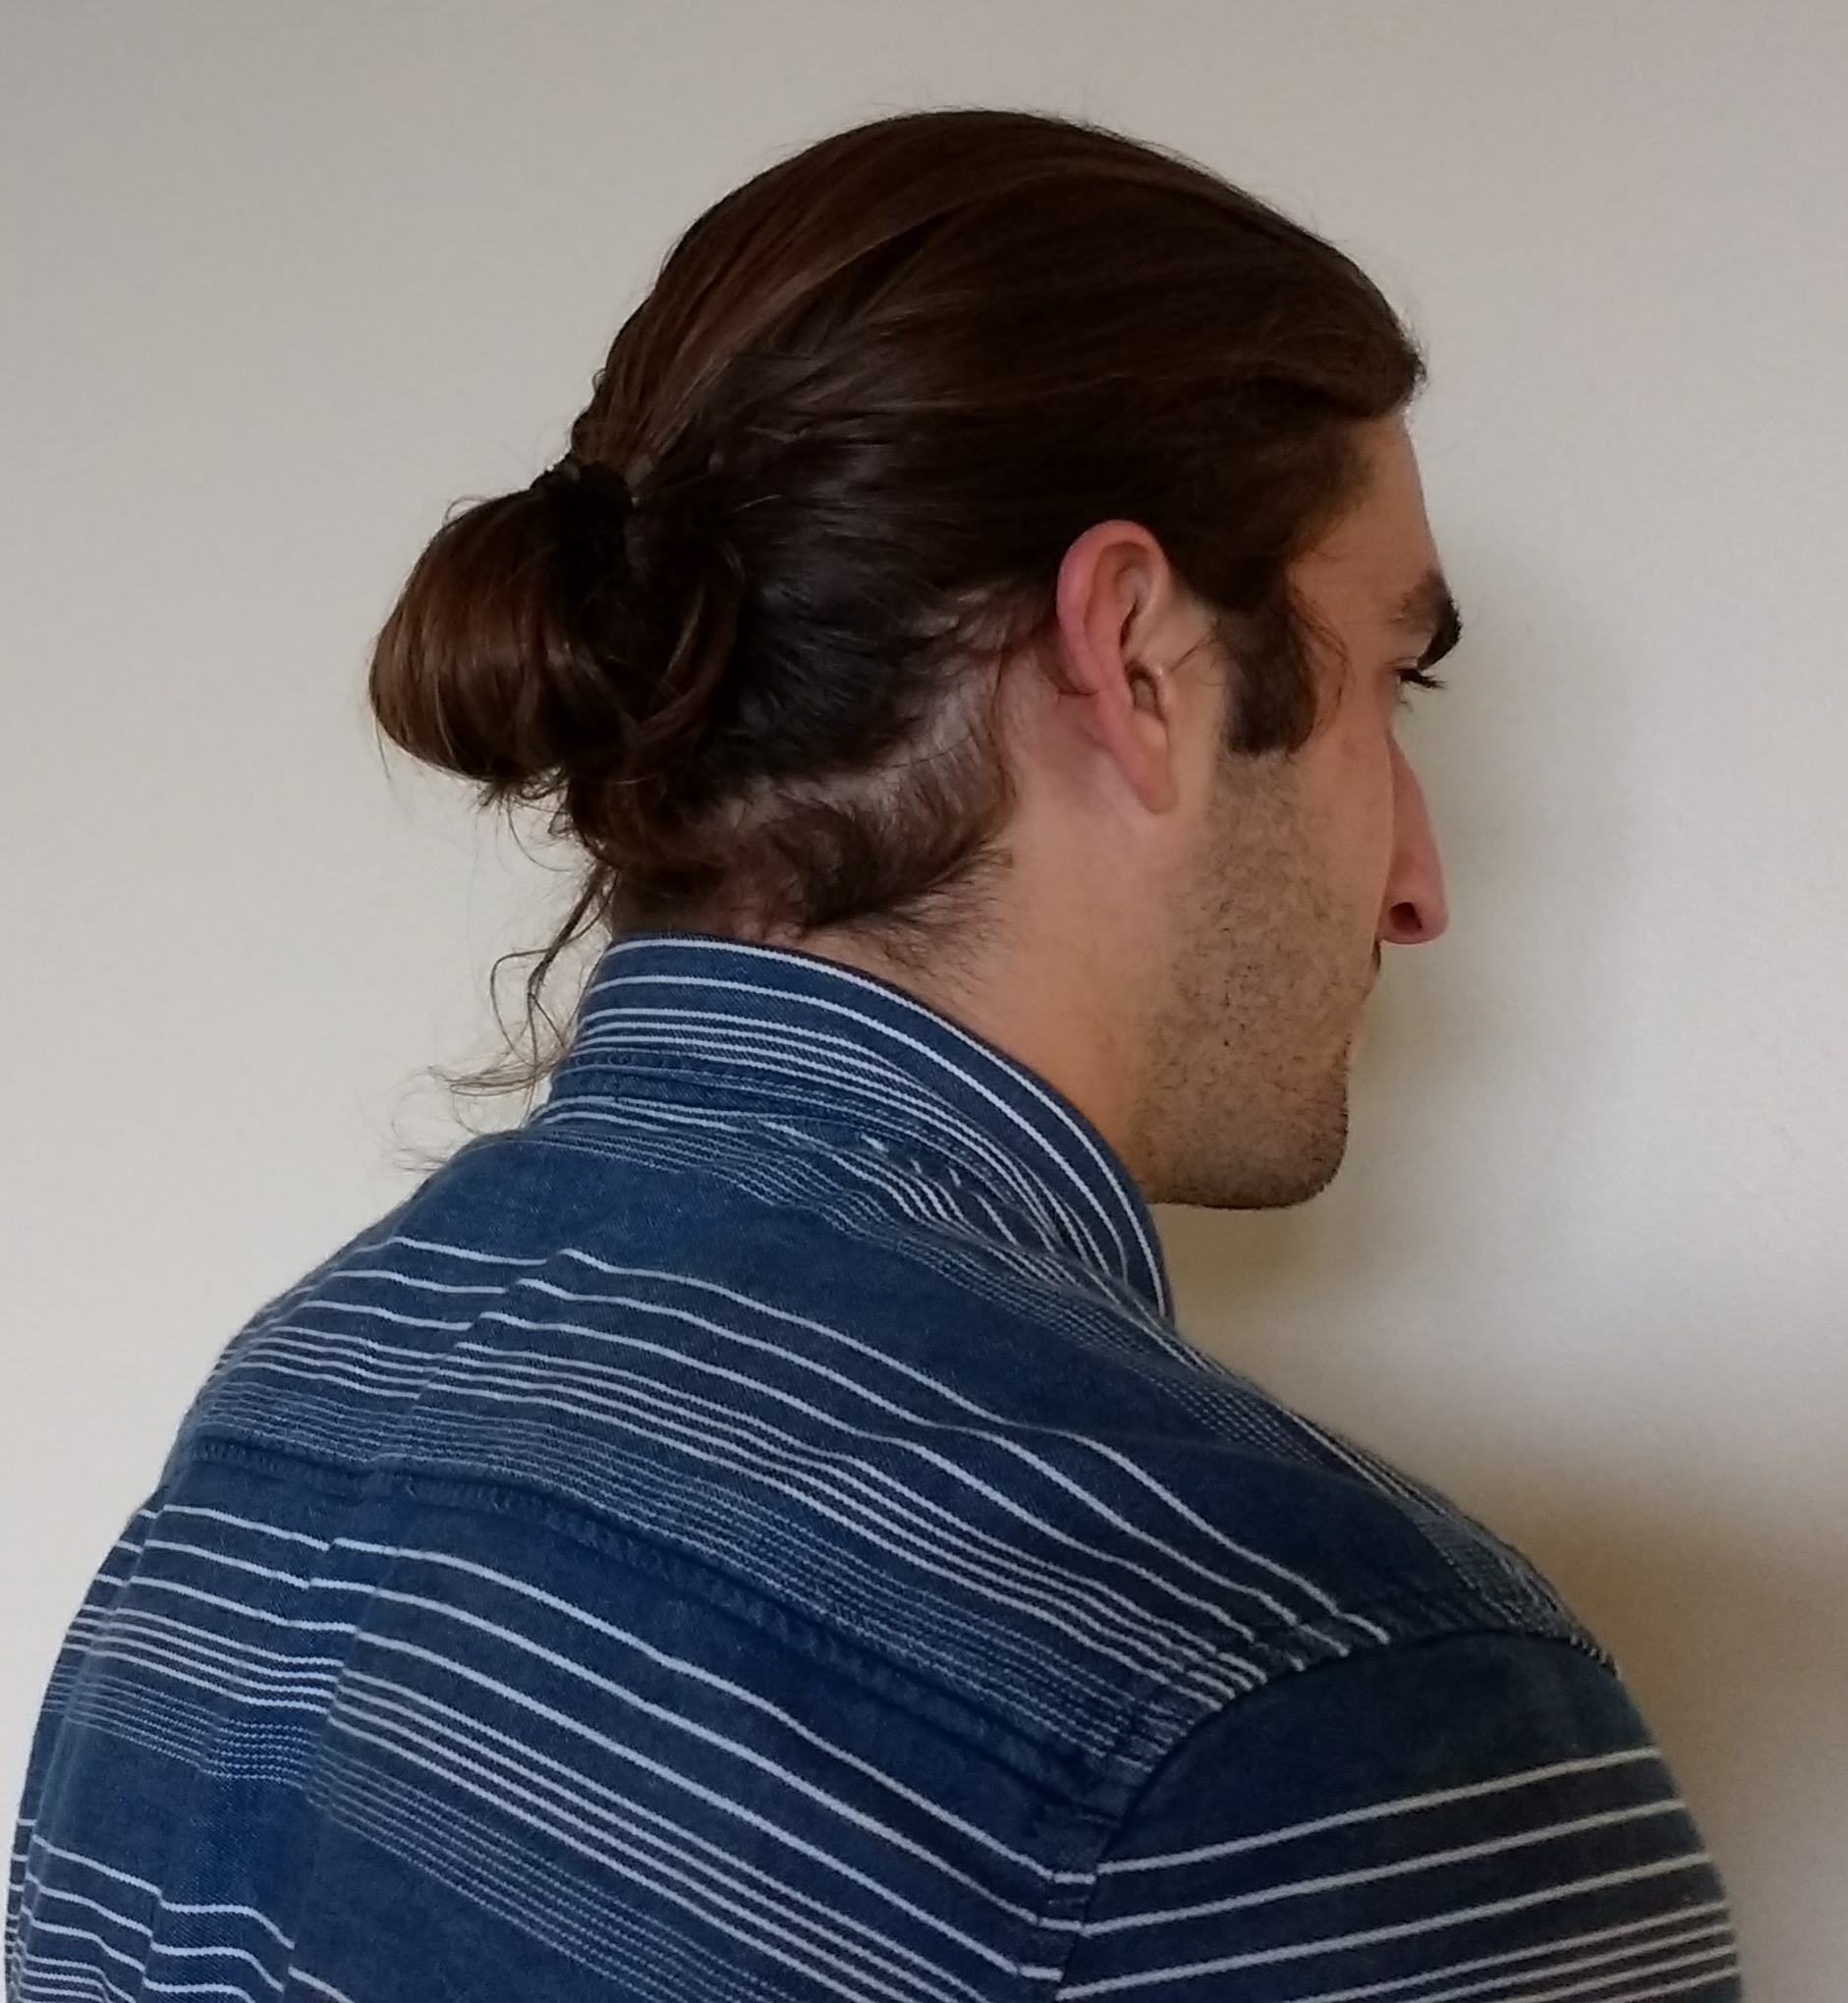 Bun (Hairstyle) - Wikipedia with regard to Asian Ponytail Hairstyles Male